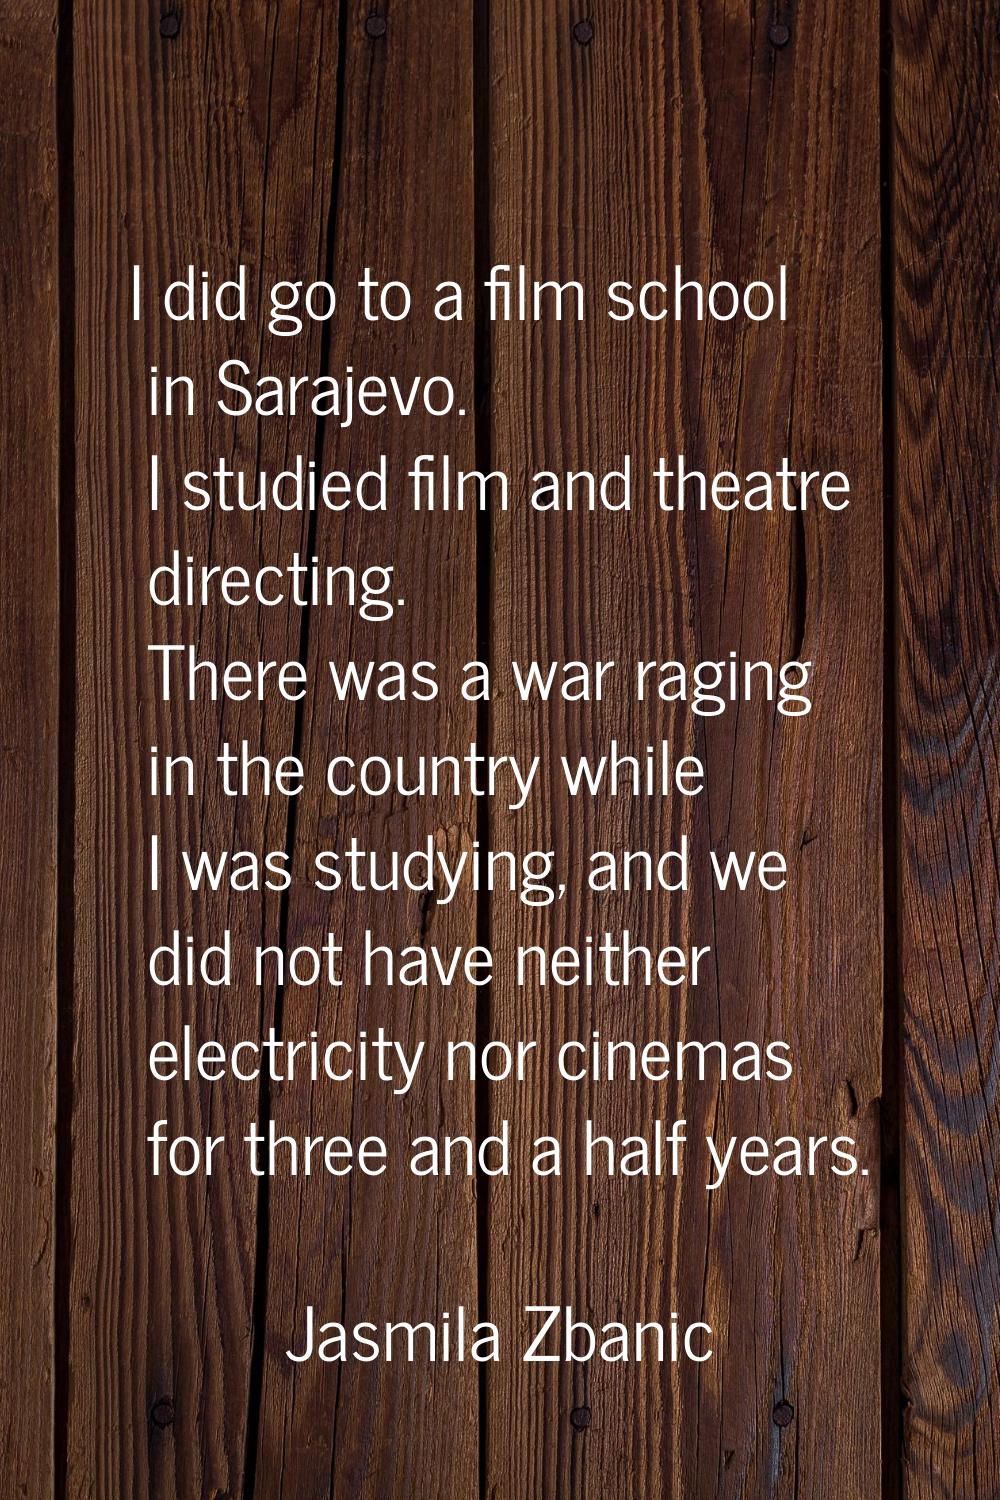 I did go to a film school in Sarajevo. I studied film and theatre directing. There was a war raging